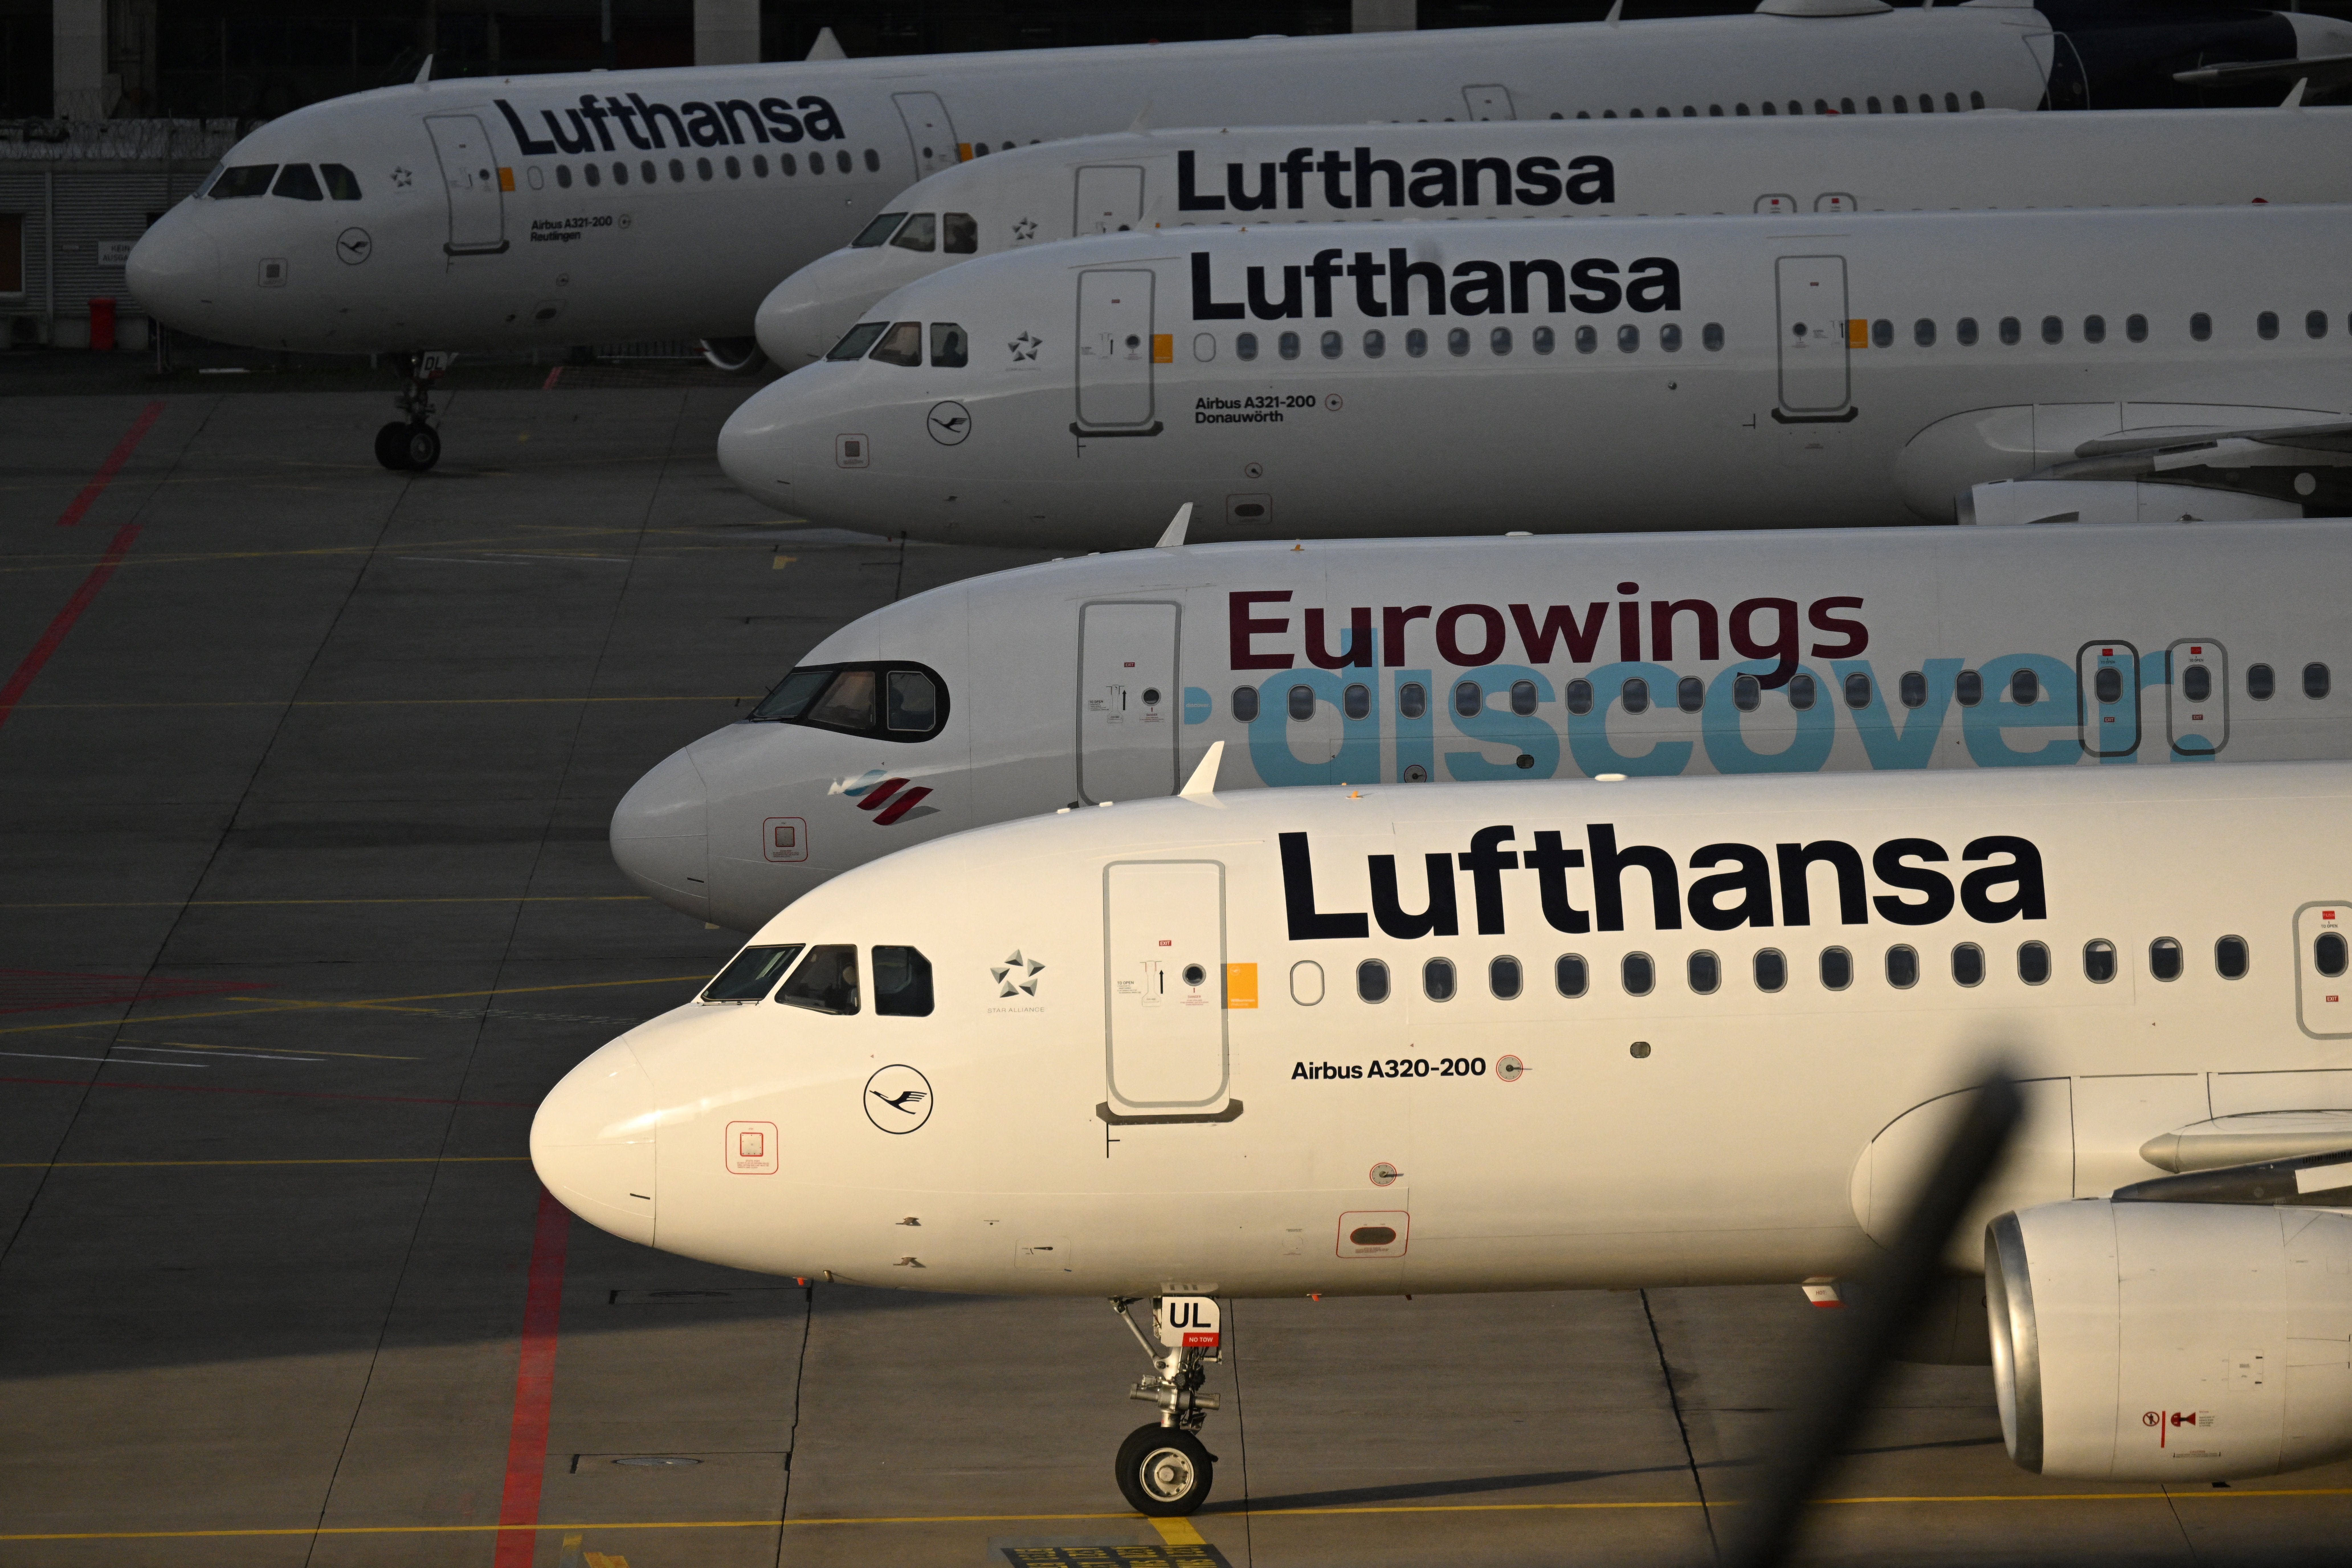 Lufthansa reported no injuries from the ‘rough landing’